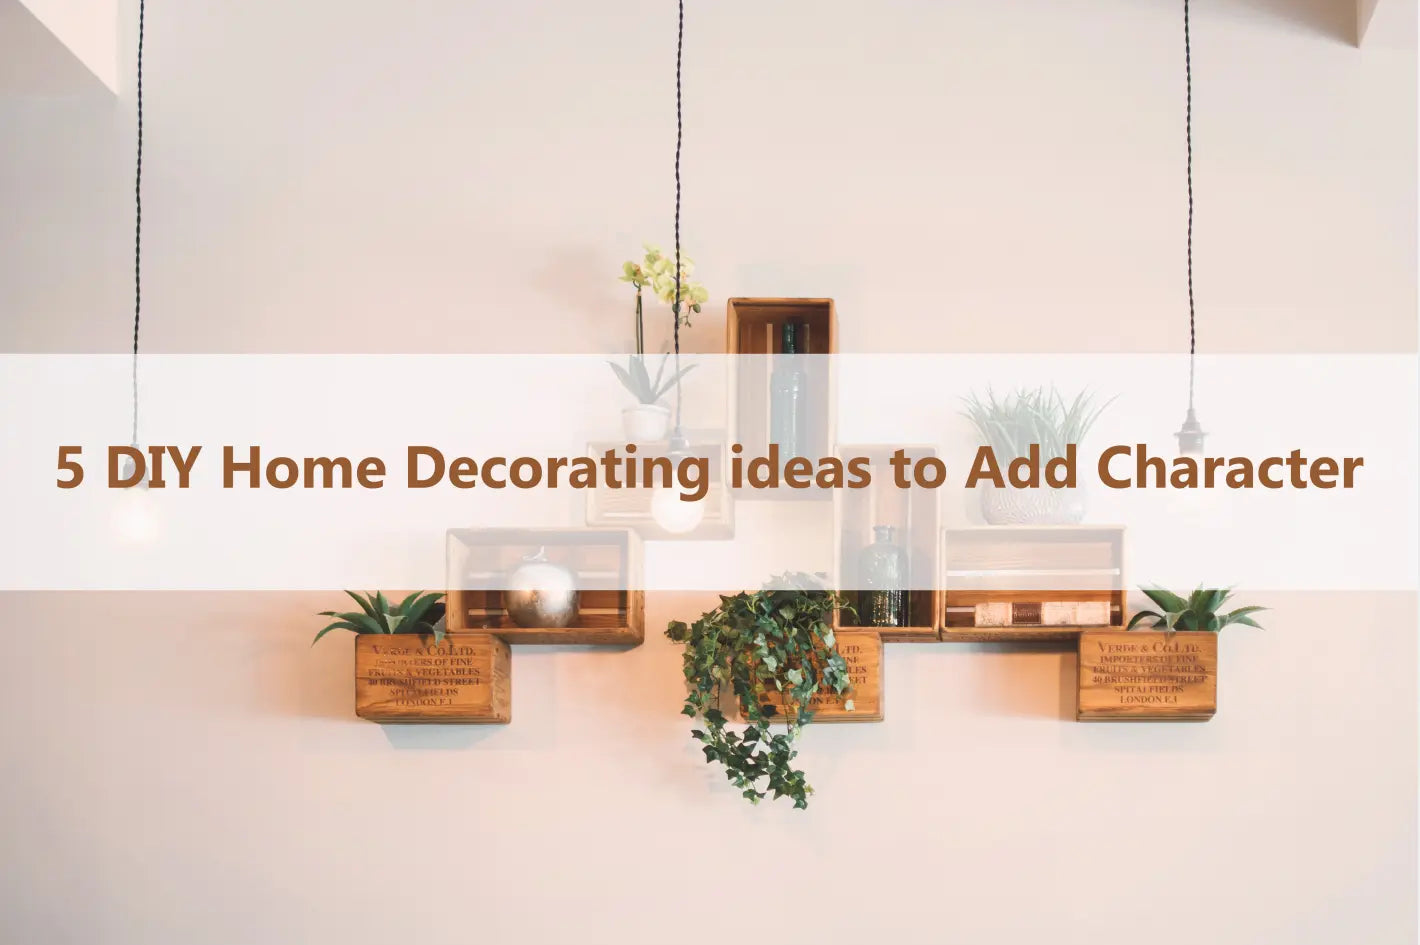 5 DIY Home Decorating Ideas to Add Character